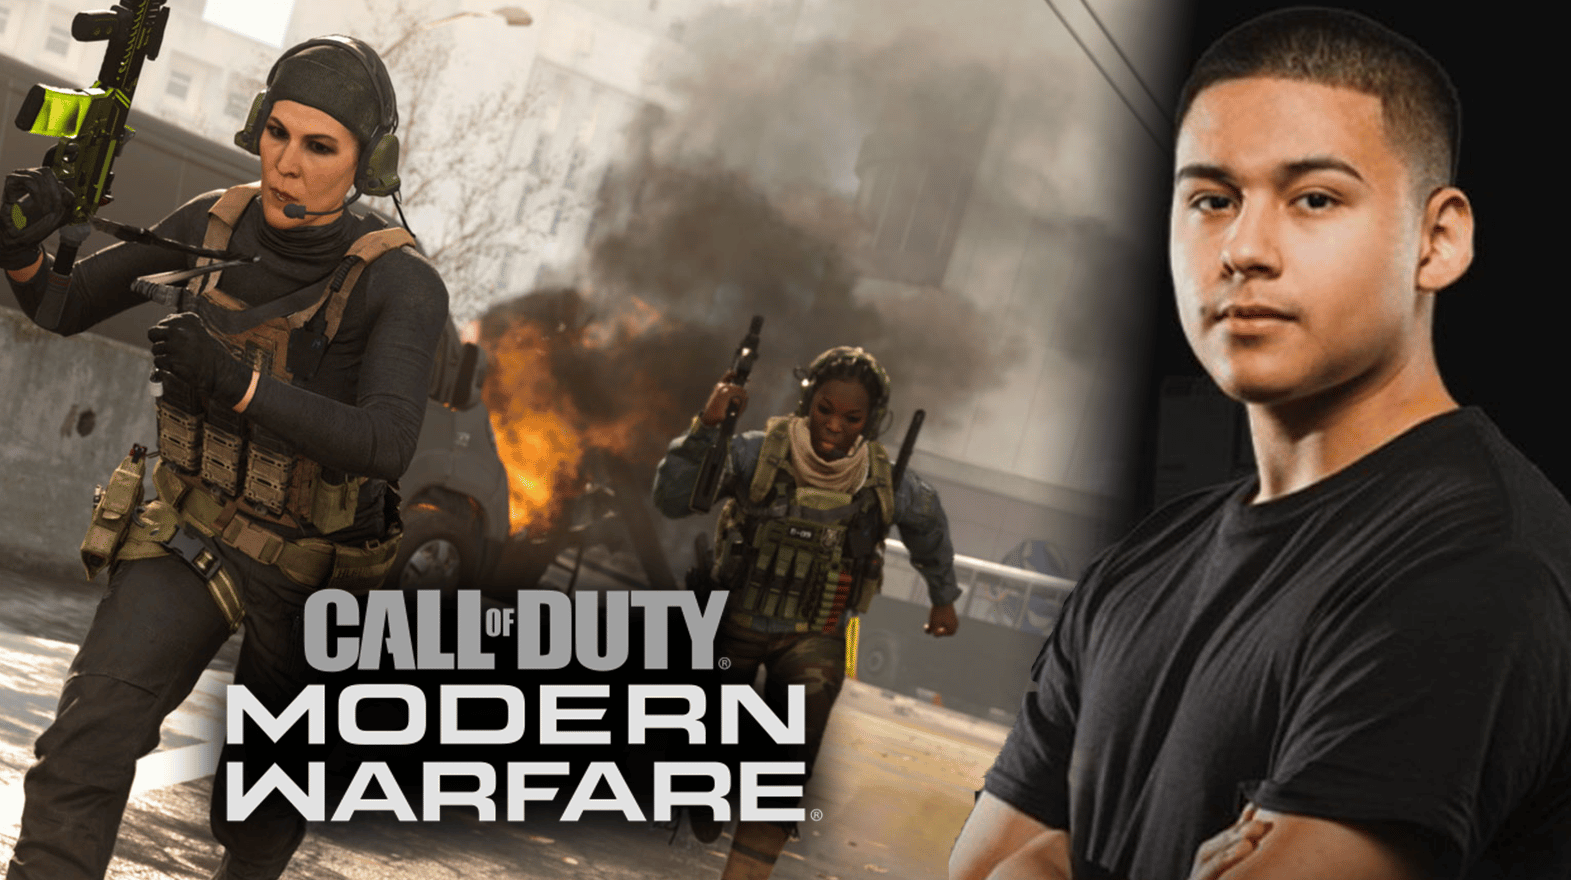 Call of Duty Modern Warfare gameplay / CDL pro Shotzzy profile picture